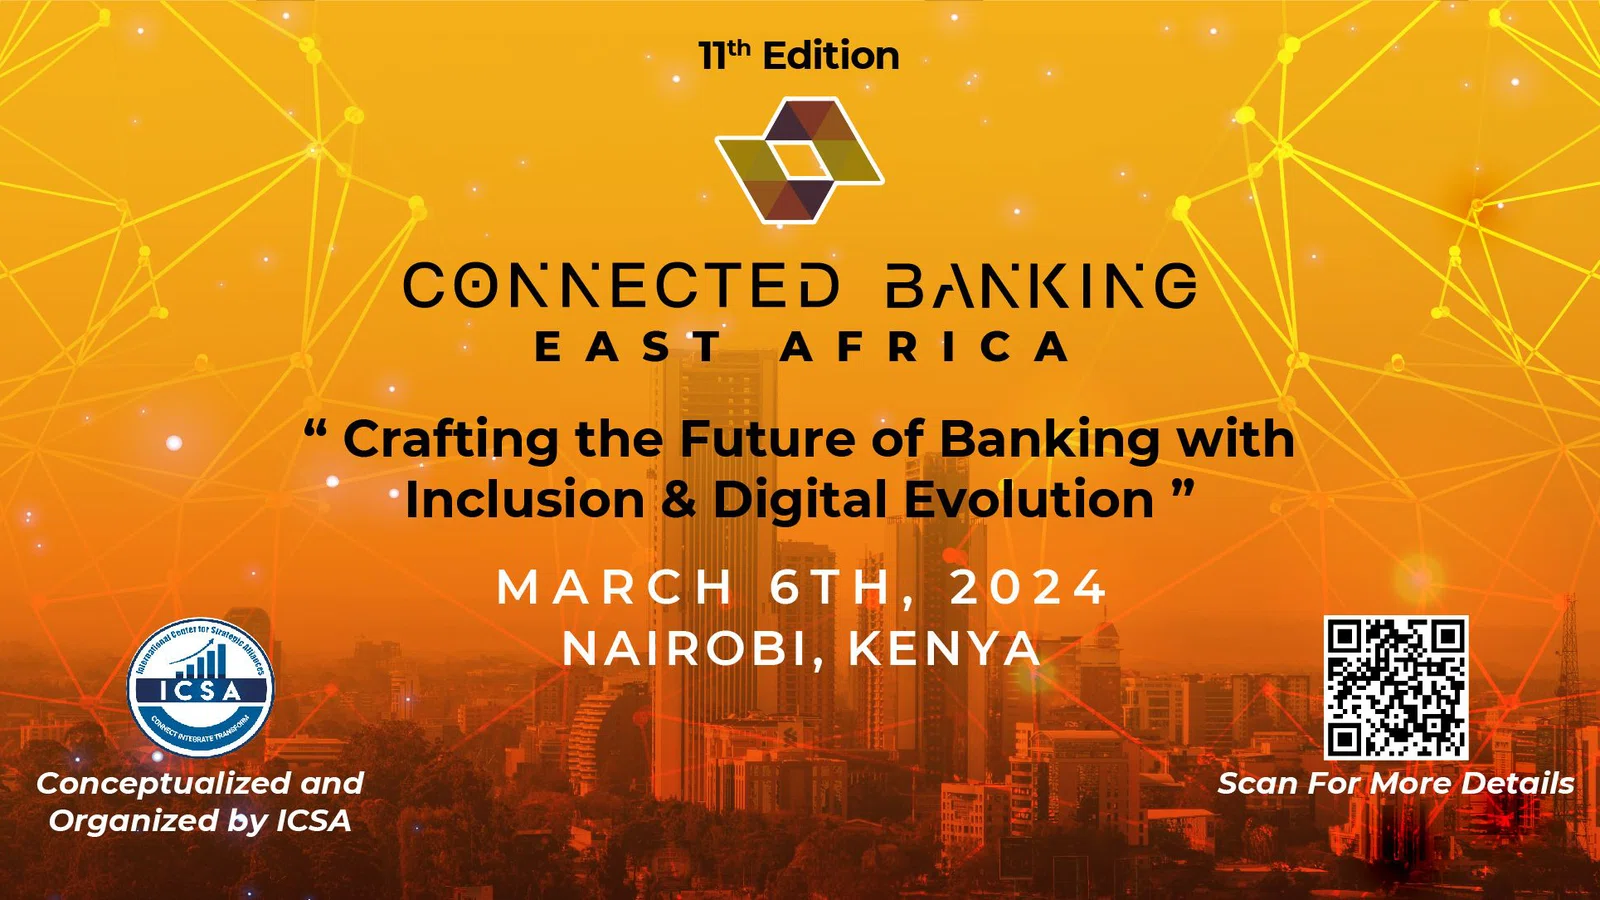 11th Edition Connected Banking Summit - East Africa